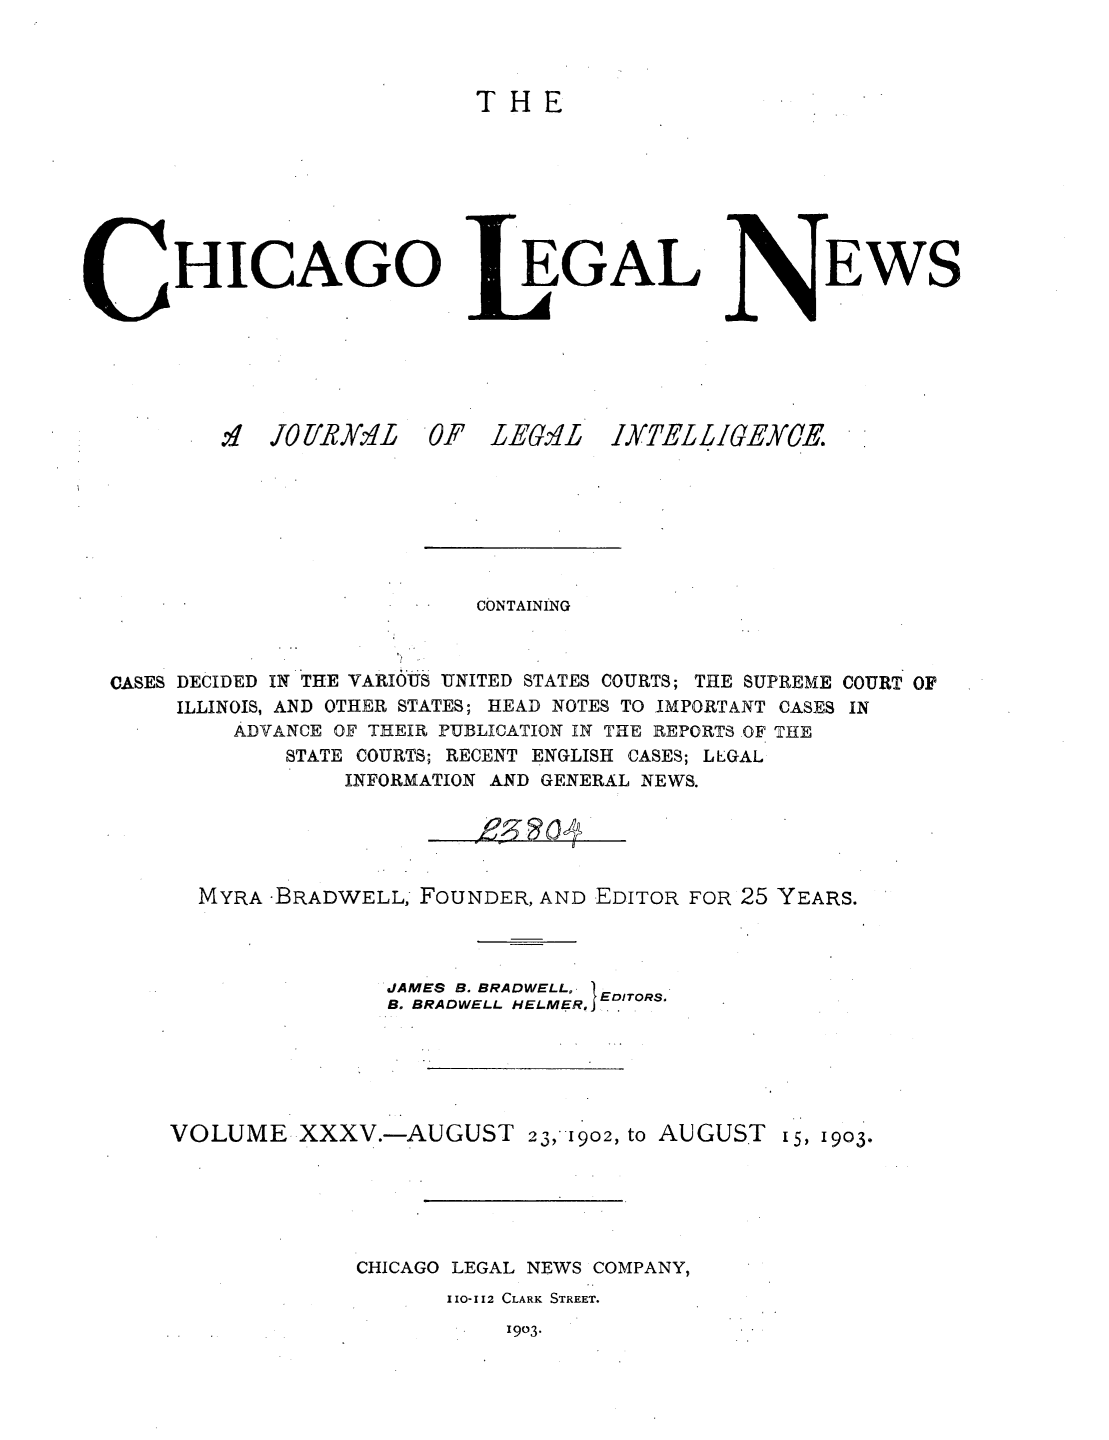 handle is hein.journals/chiclene35 and id is 1 raw text is: THEHICAGO.'1 JO1-IBy.1L  0EGALP LEG1LEWSCONTAININGCASES DECIDED IN THE VARIOUS UNITED STATES COURTS; THE SUPREME COURT OFILLINOIS, AND OTHER STATES; HEAD NOTES TO IMPORTANT CASES INADVANCE OF THEIR PUBLICATION IN THE REPORTS OF THESTATE COURTS; RECENT ENGLISH CASES; LEGALINFORMATION AND GENERAL NEWS.MYRA -BRADWELL, FOUNDER, AND EDITOR FOR 25 YEARS.JAMES B. BRADWELL., EB. BRADWELL HELMER, I EDITORSVOLUME XXXV.-AUGUST 23,1902, to AUGUST 15, I9o3.CHICAGO LEGAL NEWS COMPANY,110-112 CLARK STREET.1903.1XTELLIGEQER